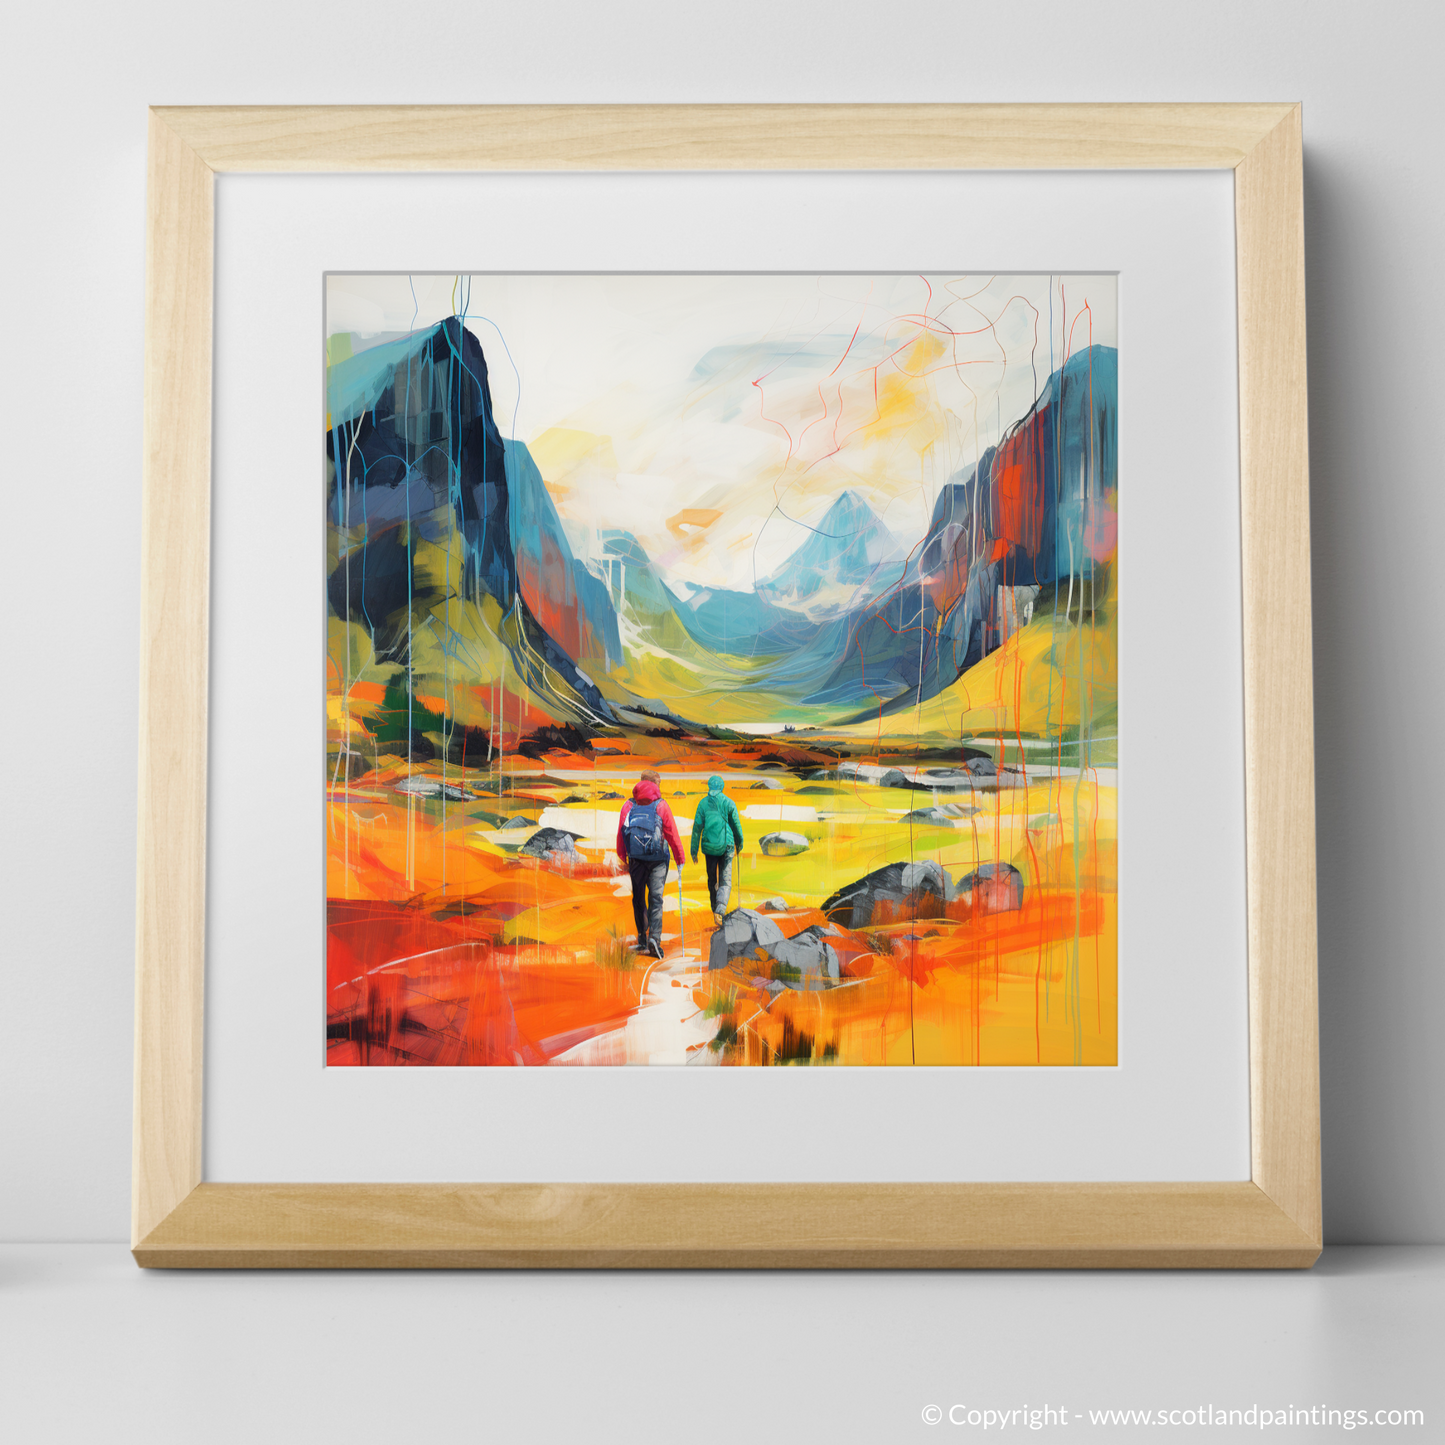 Painting and Art Print of Hikers in Glencoe. Hikers' Journey Through the Vibrant Glencoe Highlands.